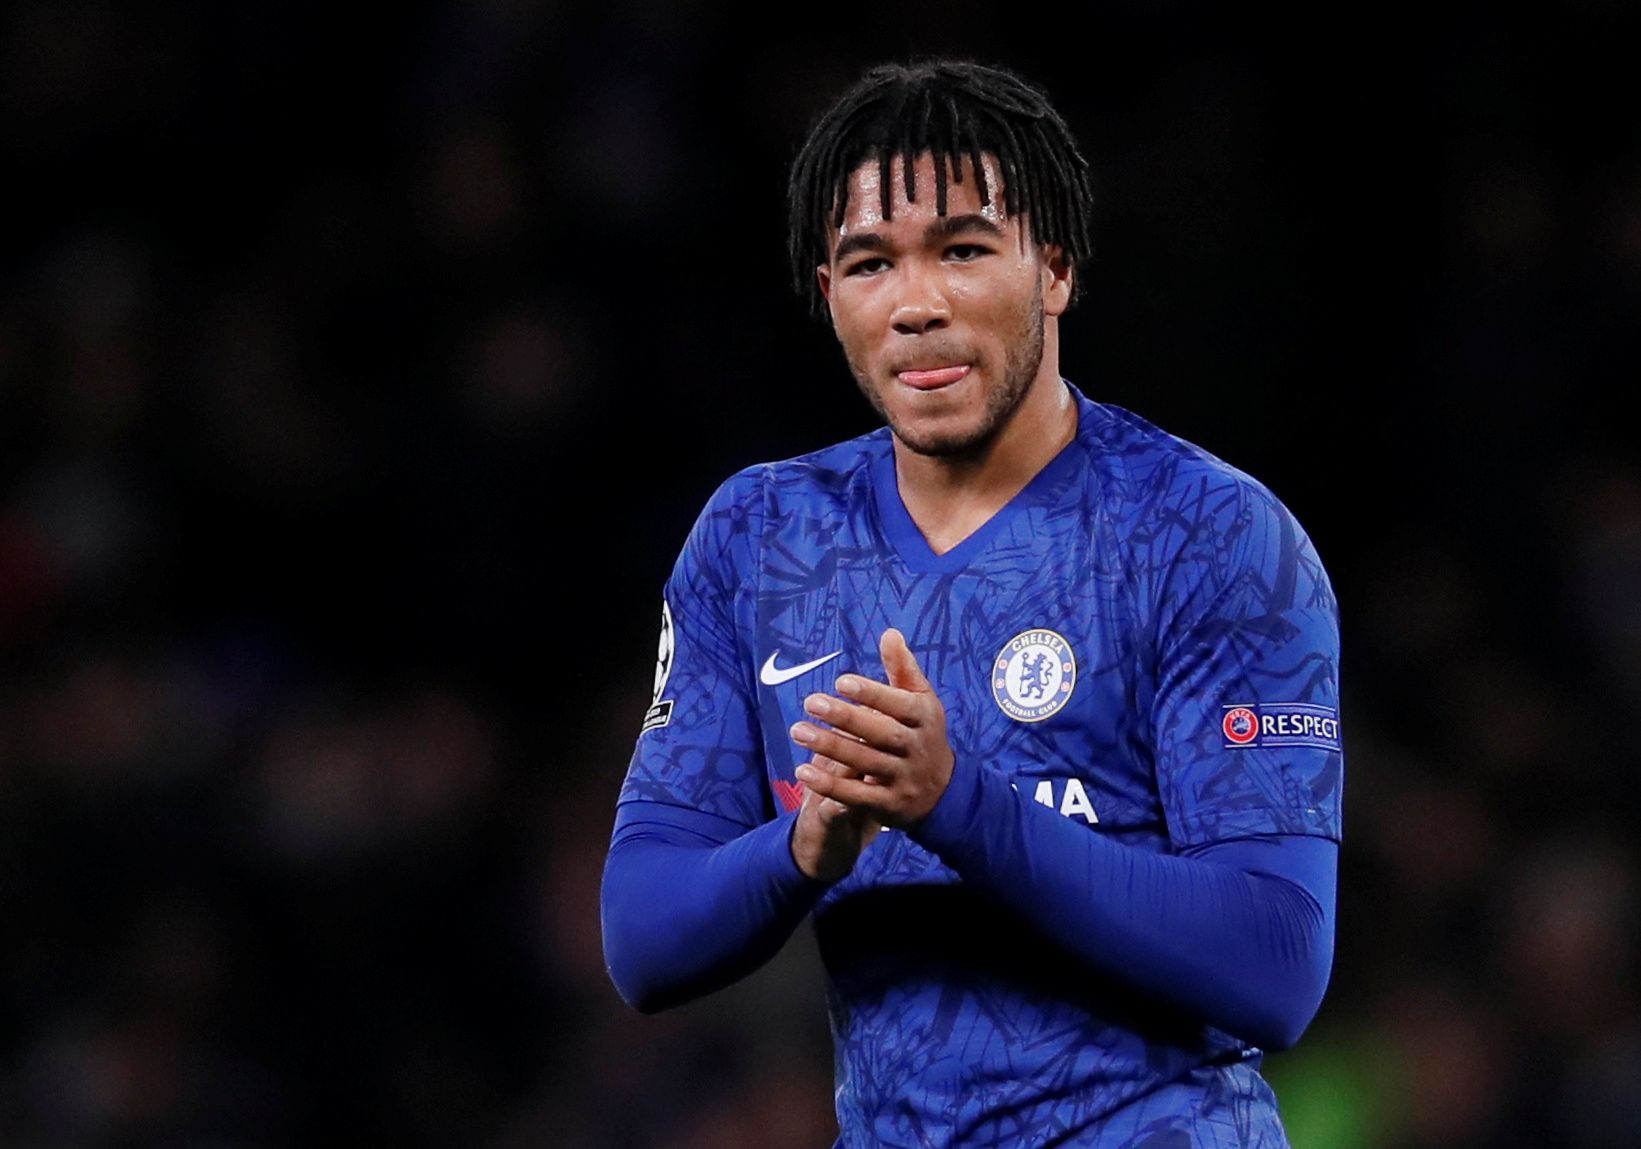 Soccer Football - Champions League - Group H - Chelsea v Ajax Amsterdam - Stamford Bridge, London, Britain - November 5, 2019  Chelsea's Reece James applauds the fans after the match    REUTERS/David Klein